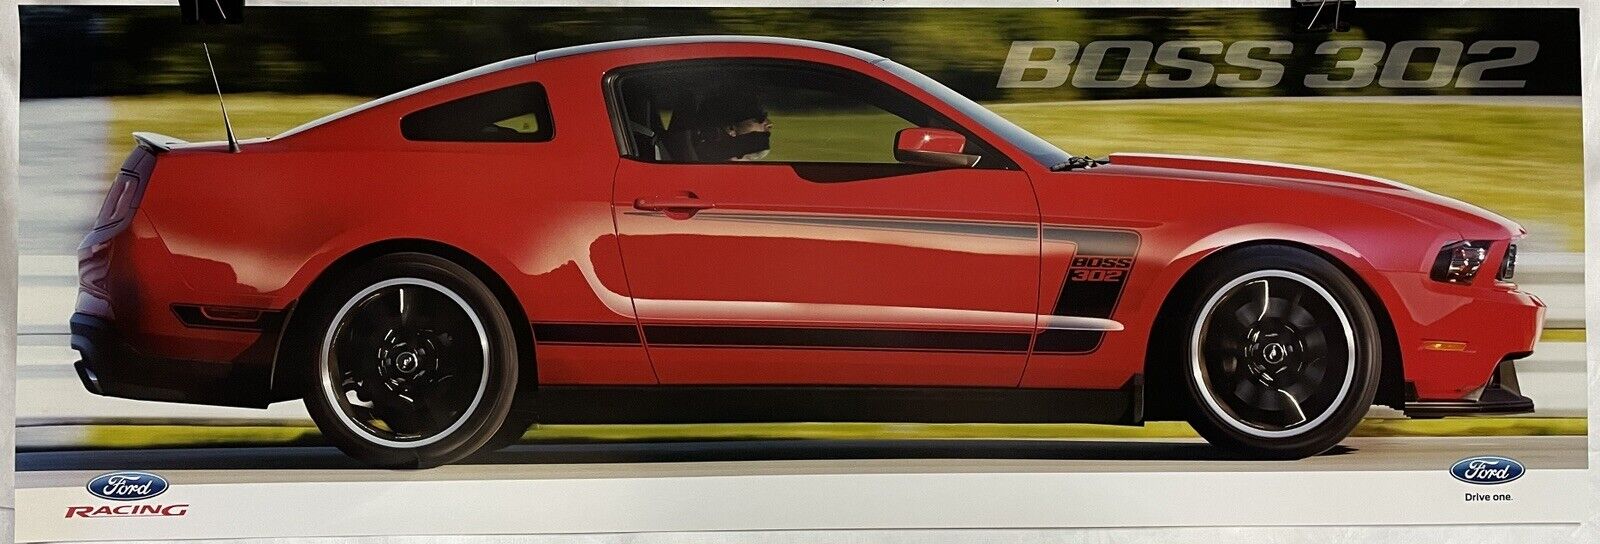 Rare NOS 2012 Ford Racing Boss 302 Mustang 2 Sided Heavy Stock Dealership Poster